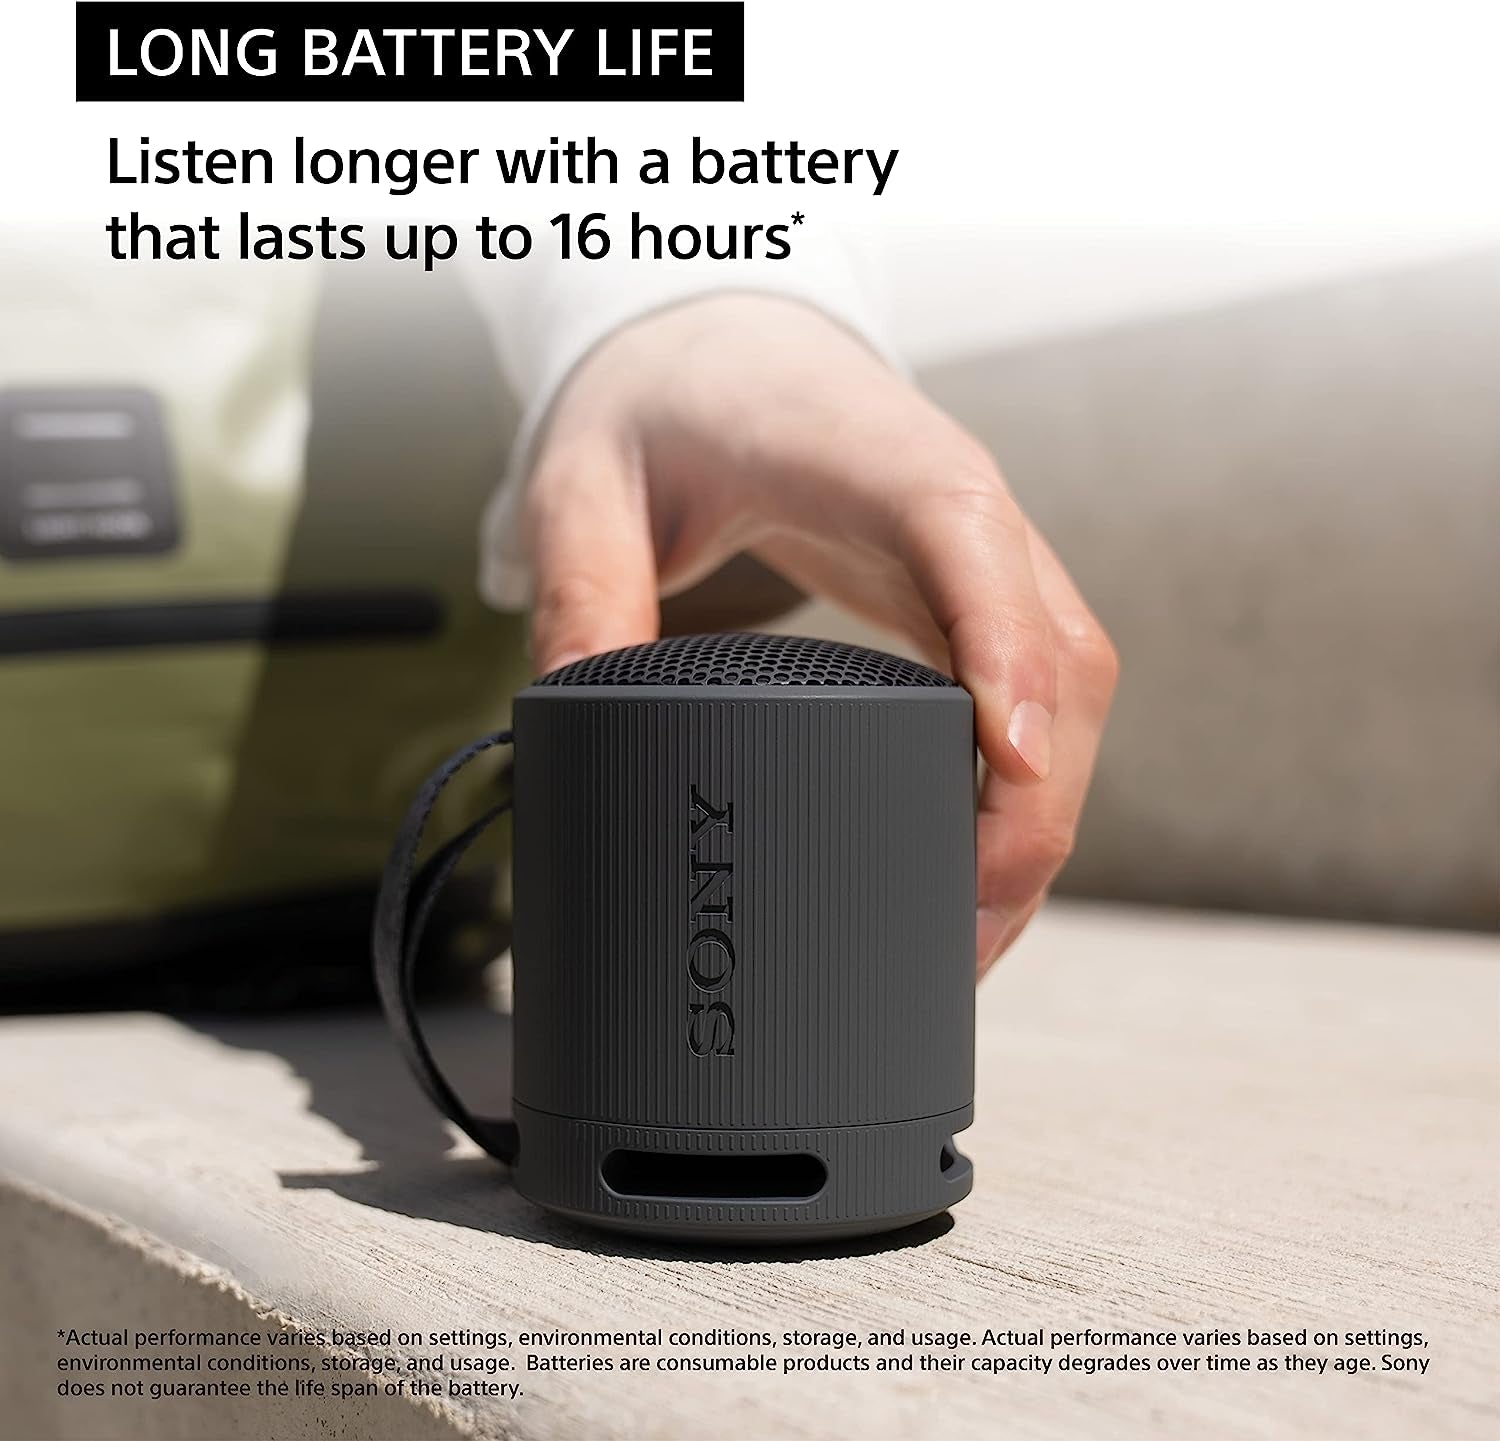 SRS-XB100 SONY Wireless Bluetooth Portable Speaker with IP67 Waterproof & Dustproof, Long Battery Life, Versatile Strap, and Hands-Free Calling - Black